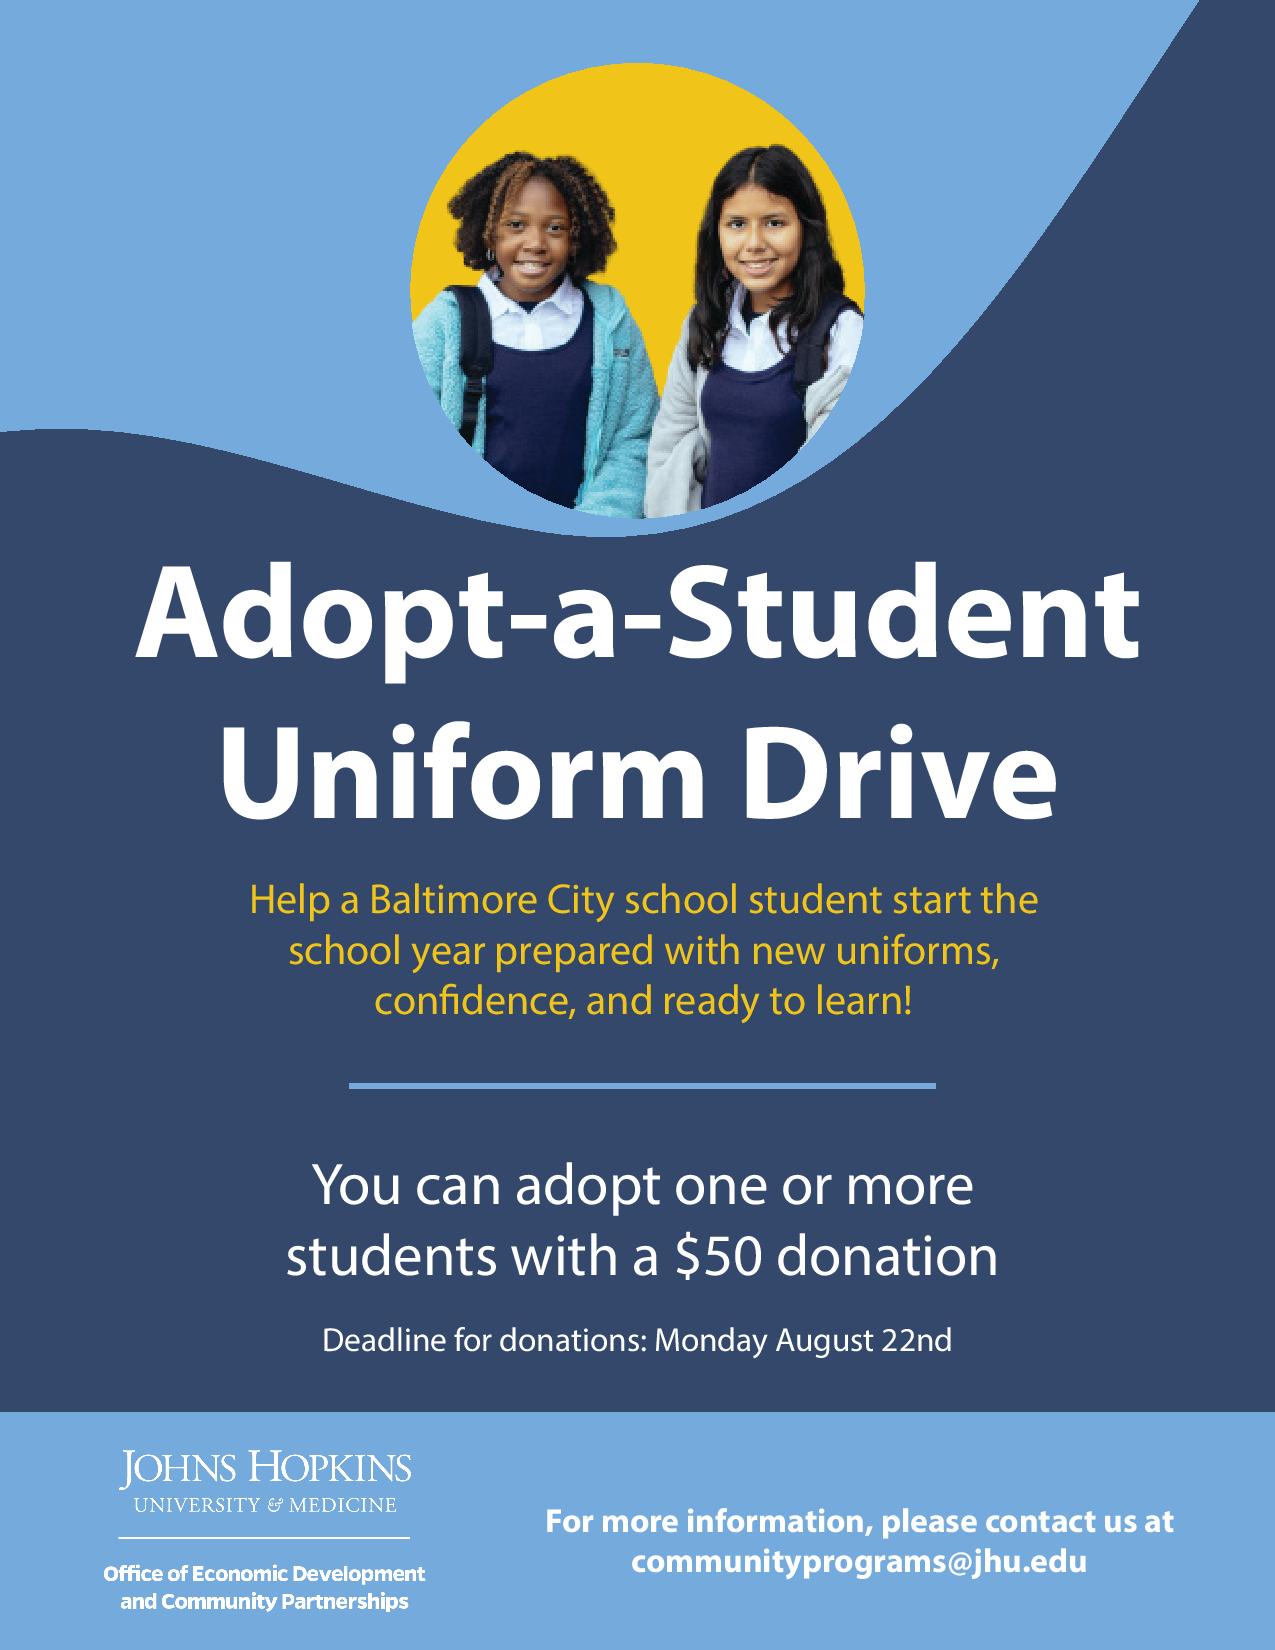 Help a Baltimore City school student start the school year prepared with new uniforms.